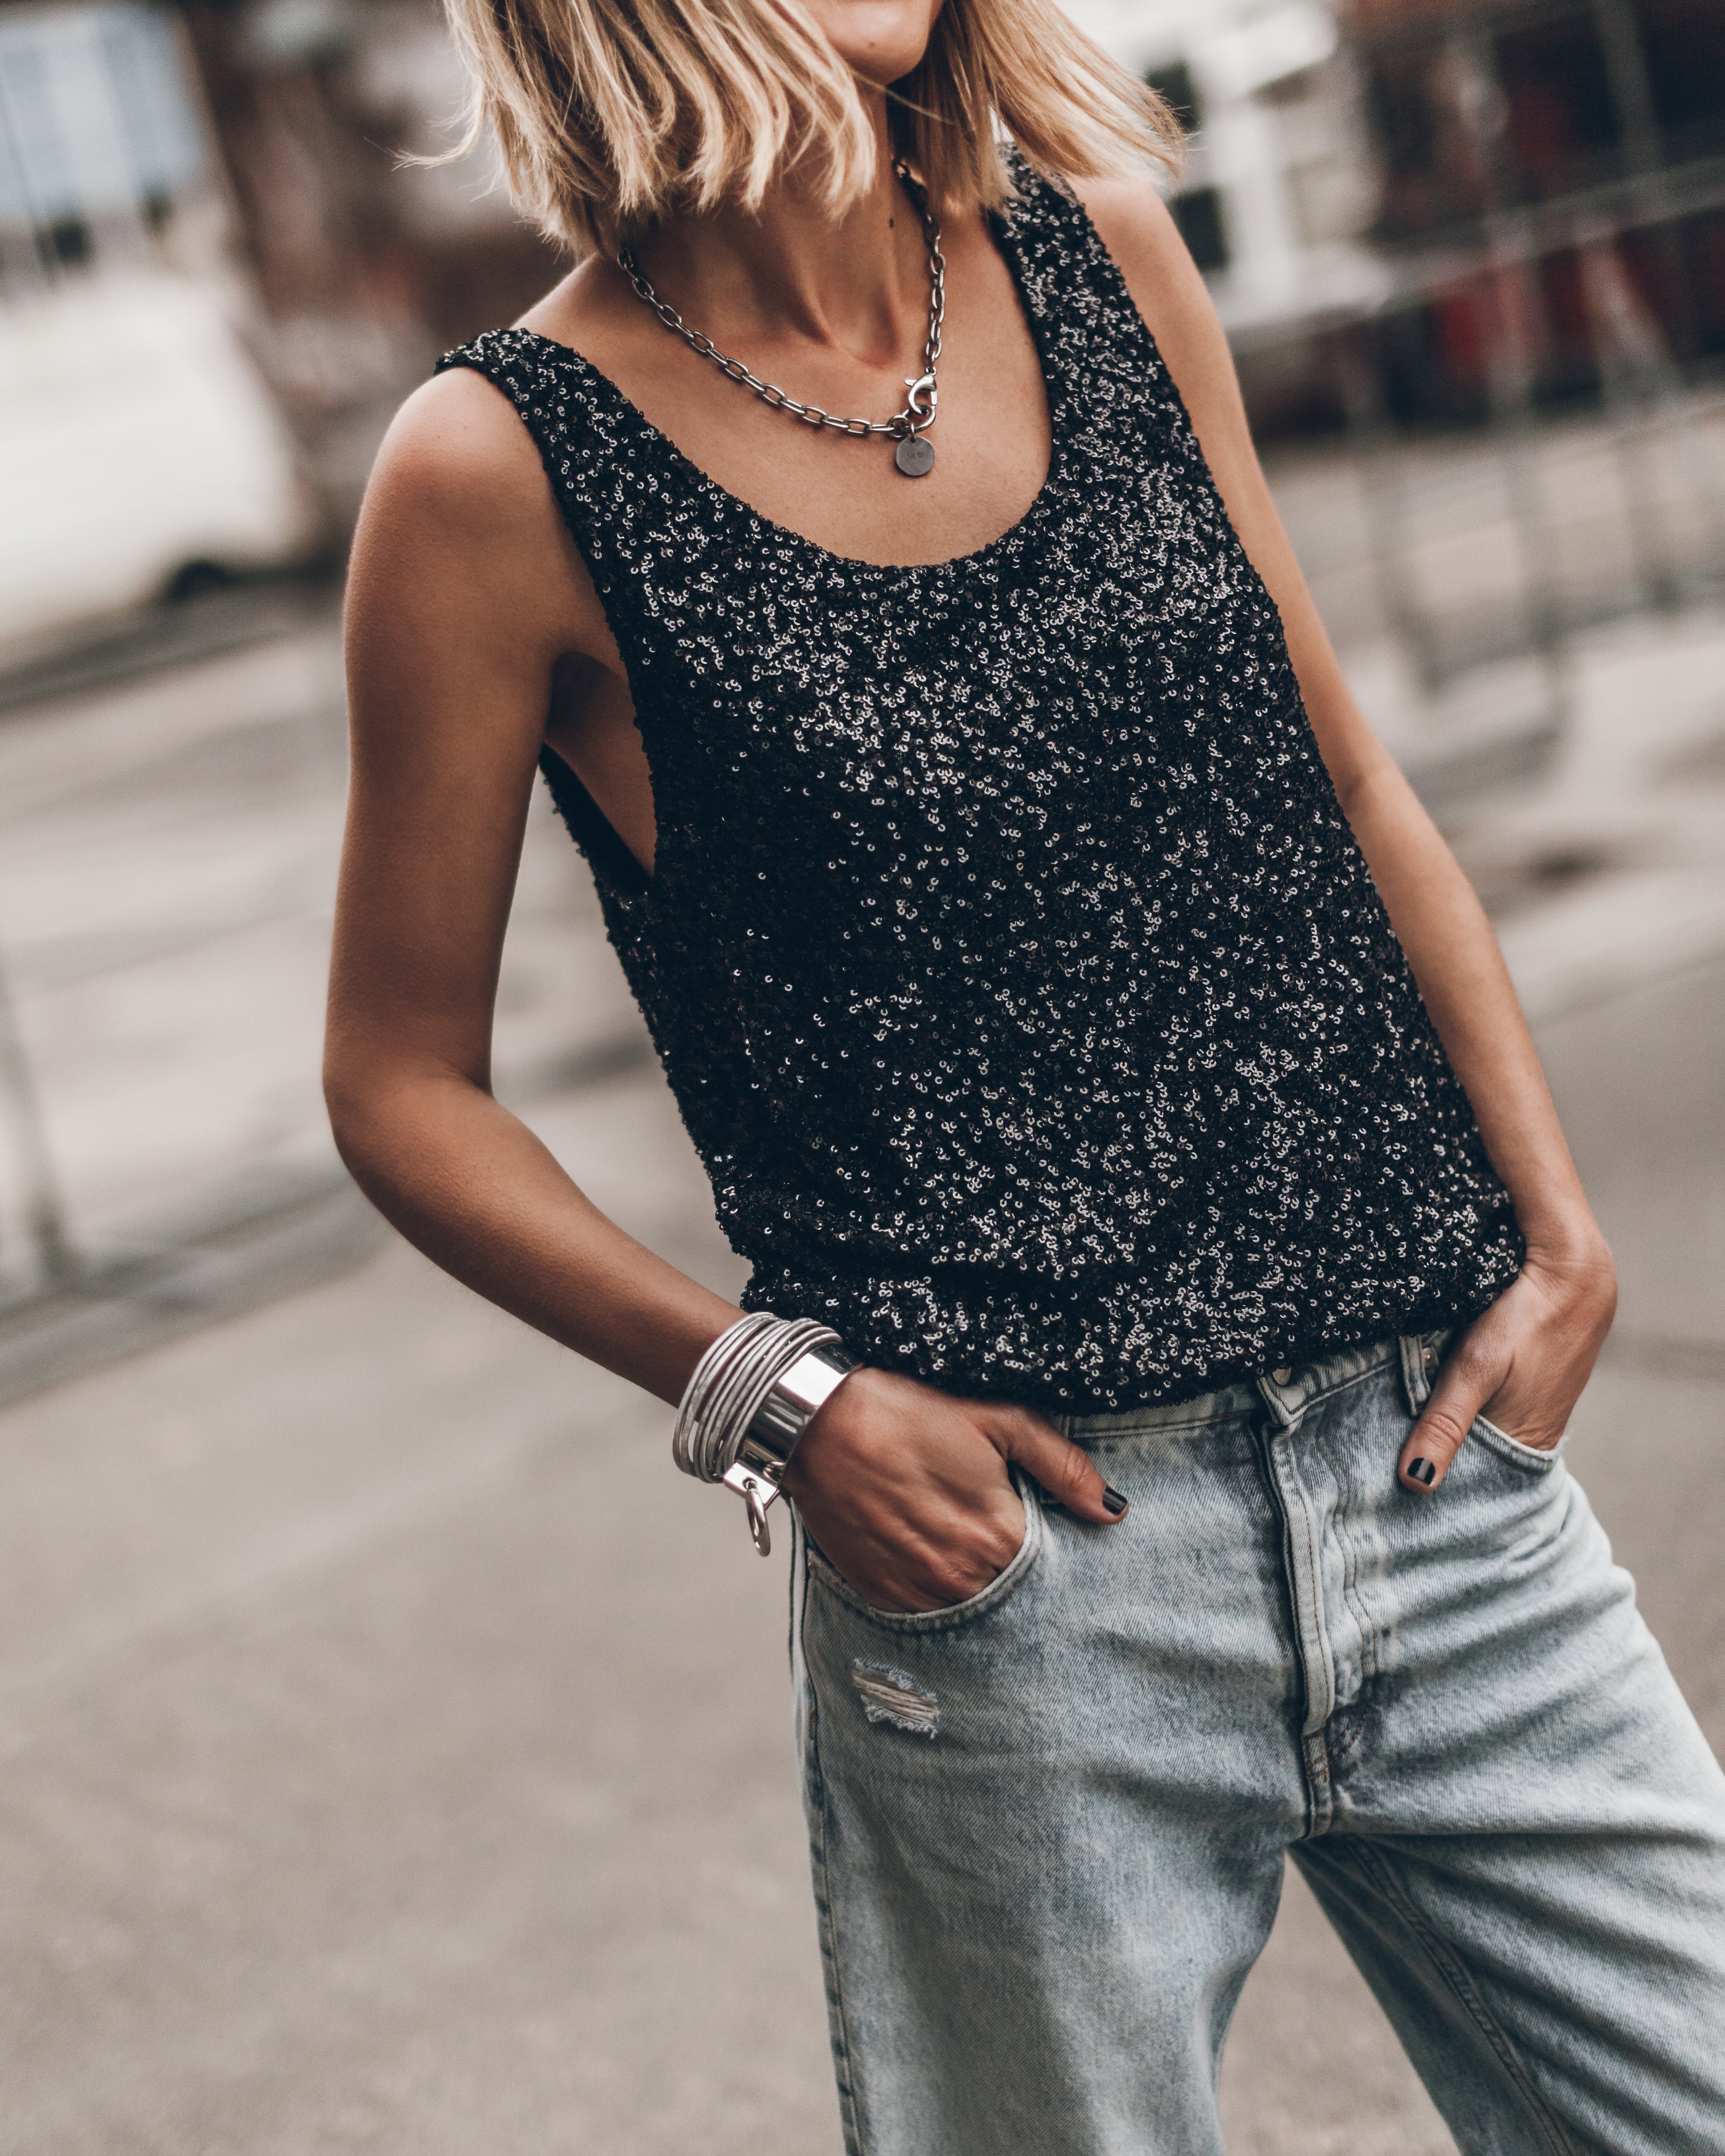 The Black Sequin Base Tank Top